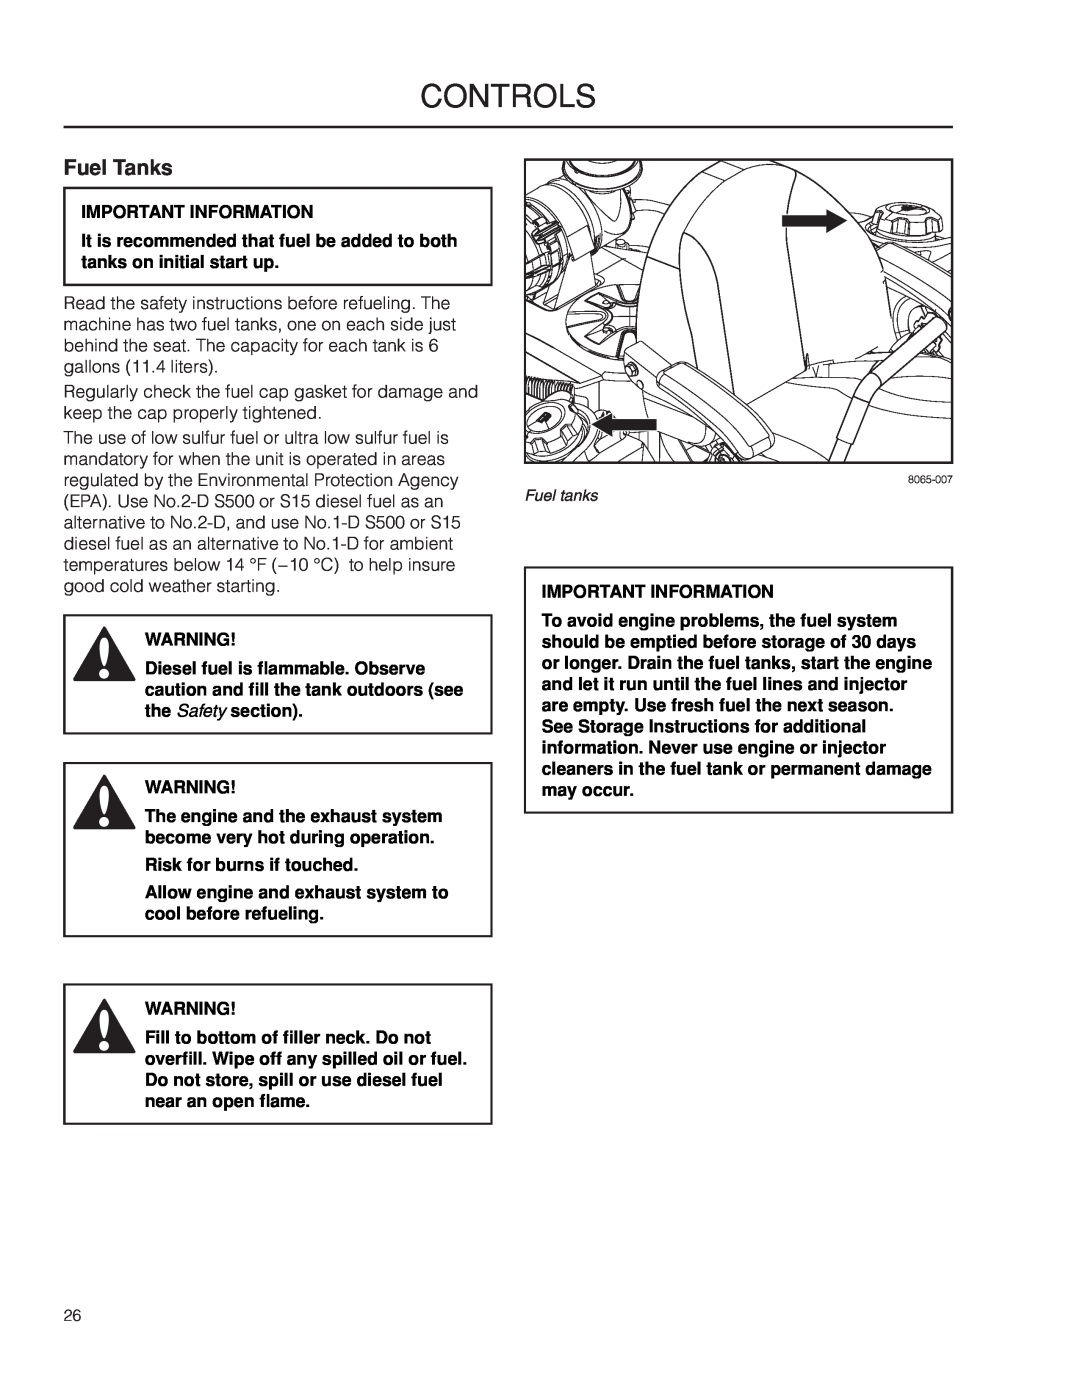 Husqvarna 966616701, PZ29D CE manual Fuel Tanks, Risk for burns if touched, Controls, Important Information 